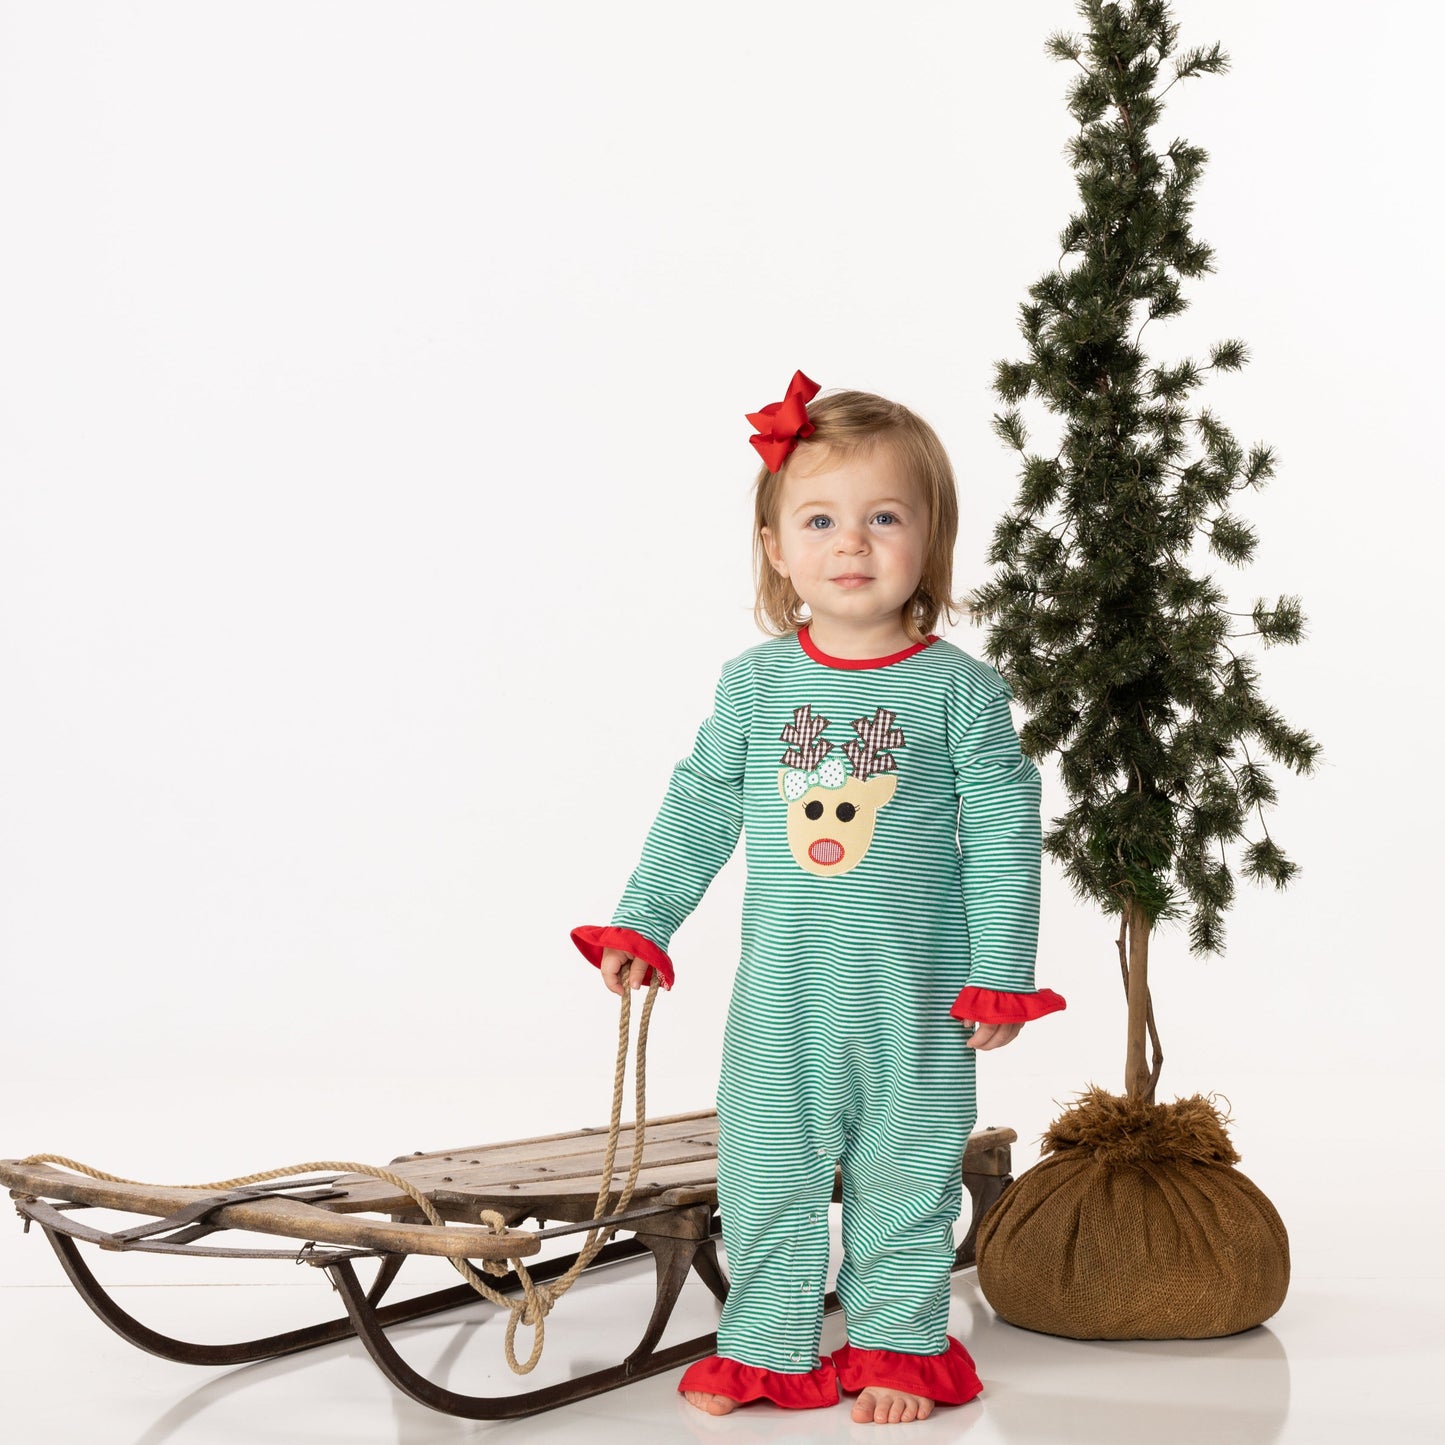 Reese Reindeer Ruffle Romper Jellybean by Smock Candy